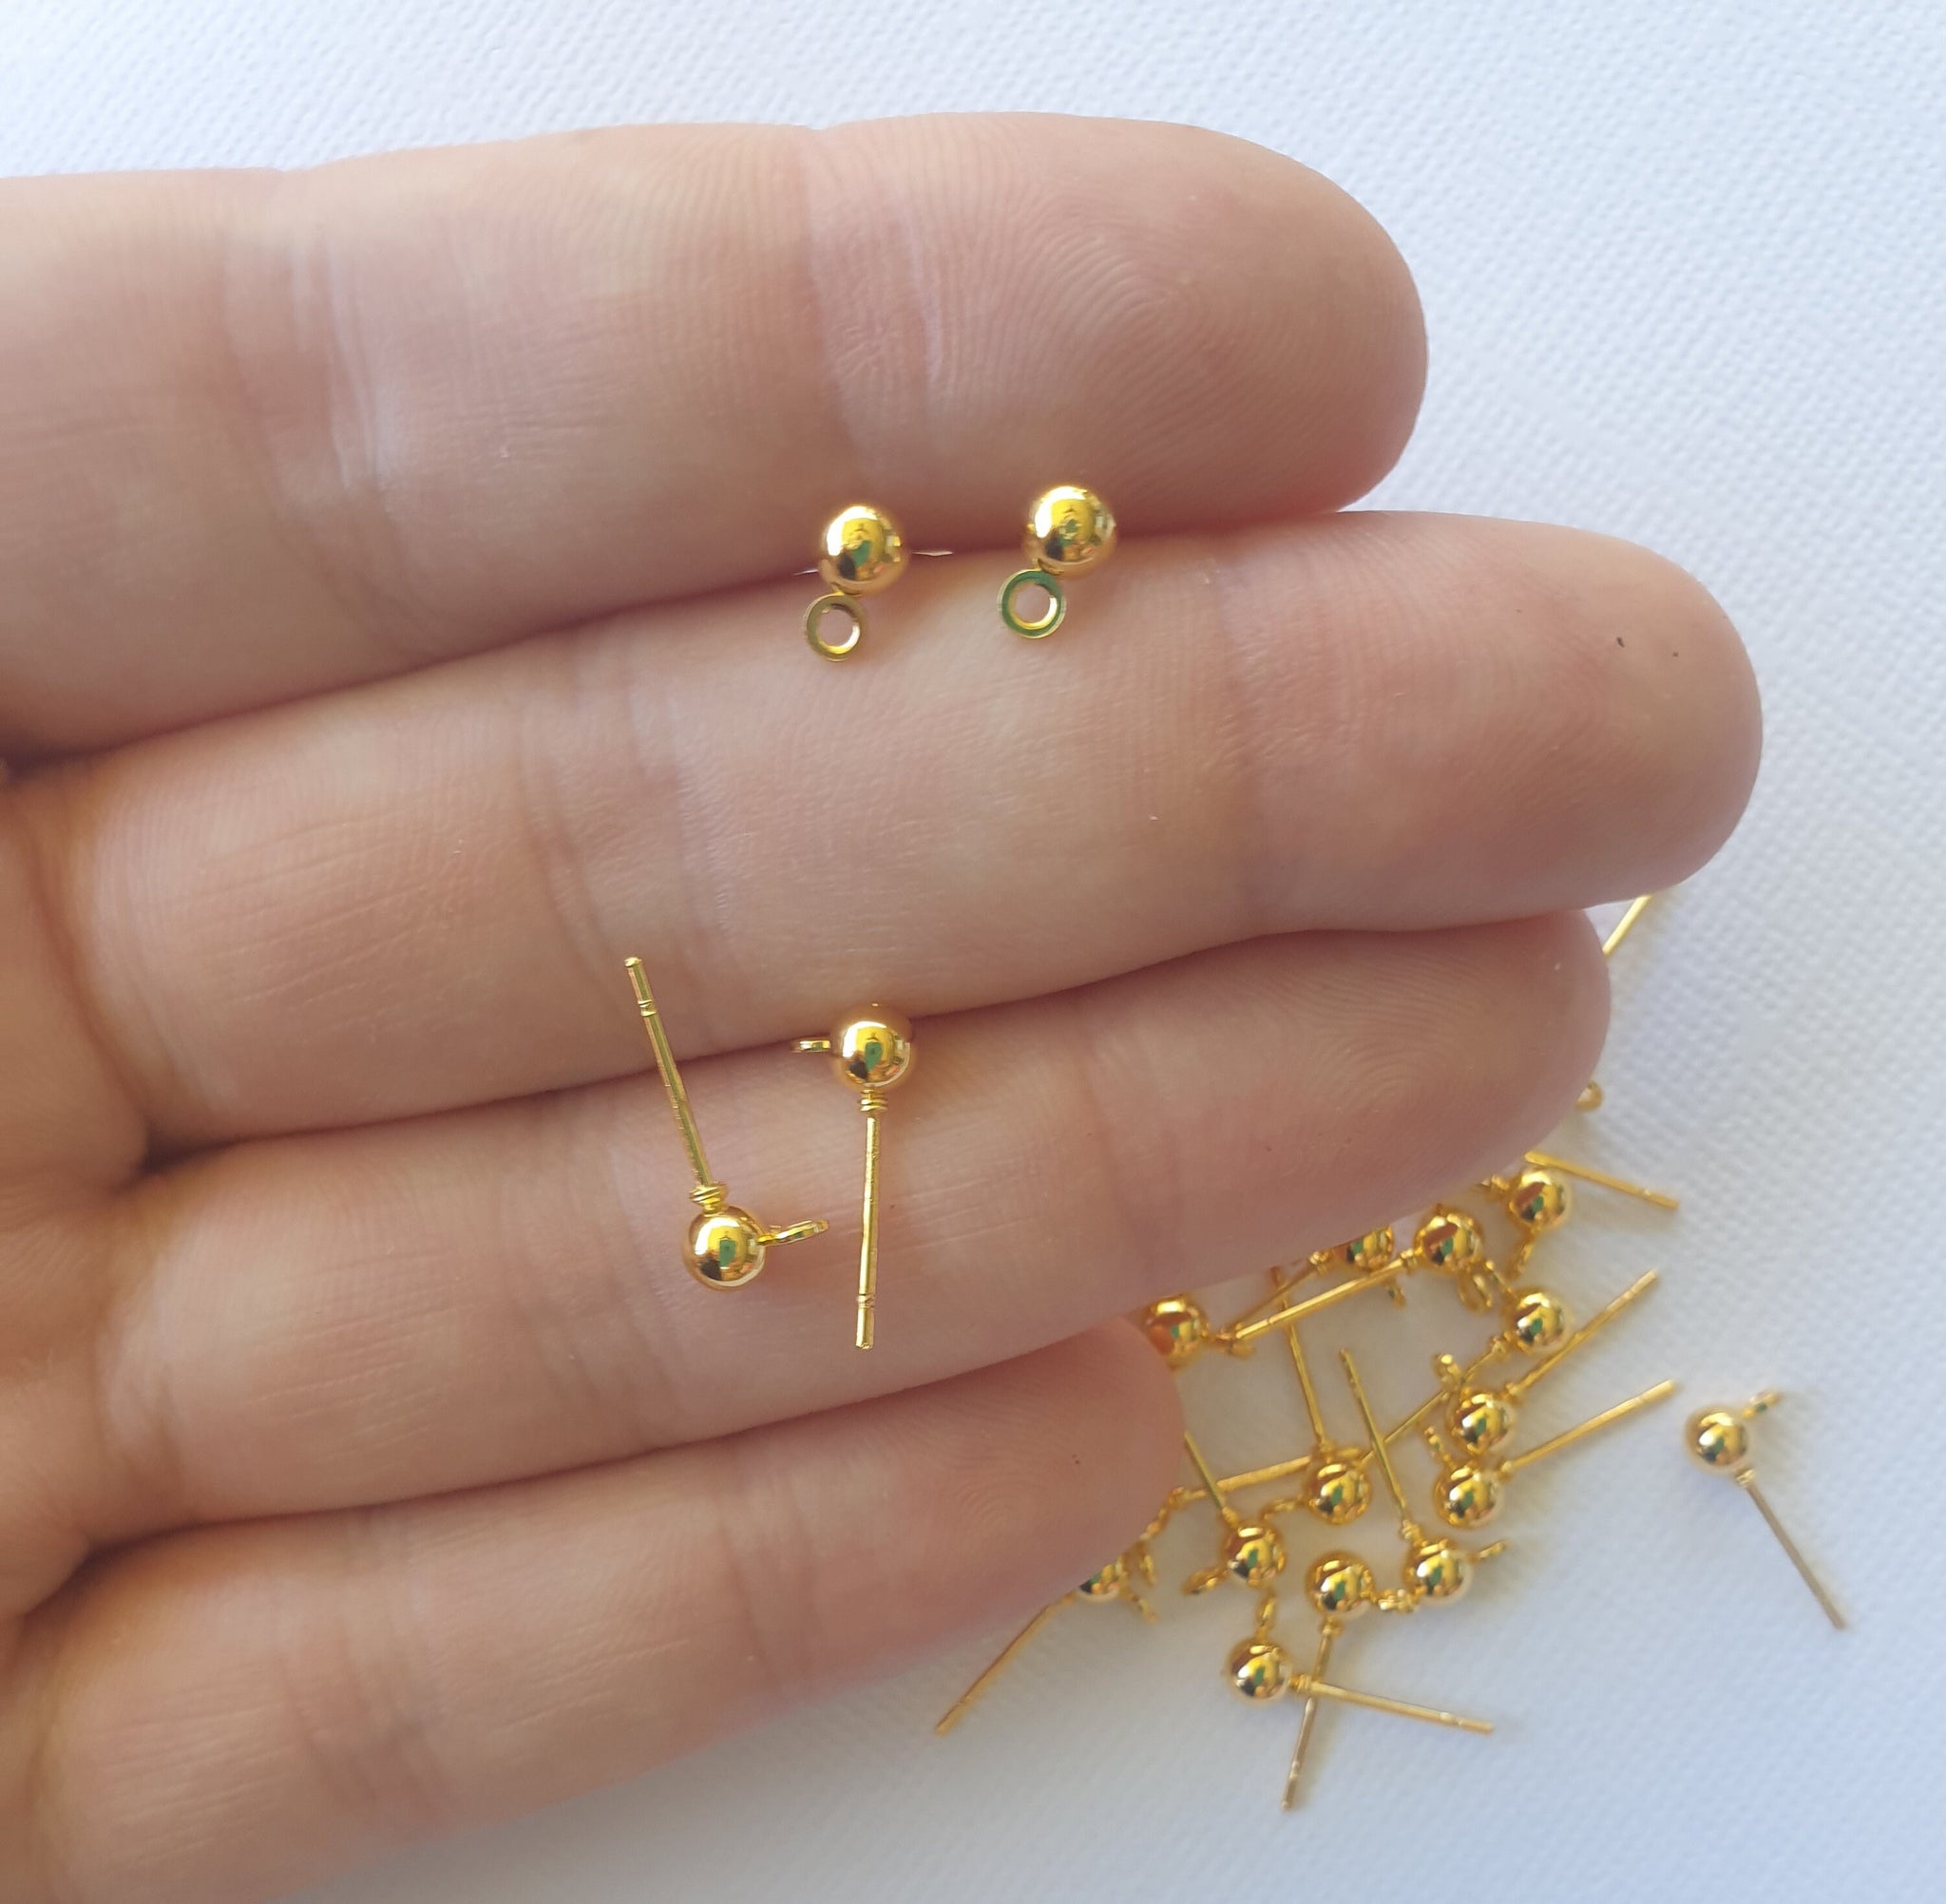 10pcs (5prs) 3/4/5mm Round Ball Earrings, Earring Pins, Gold Ball Earring, Earring Connectors, Jewellery making supplies